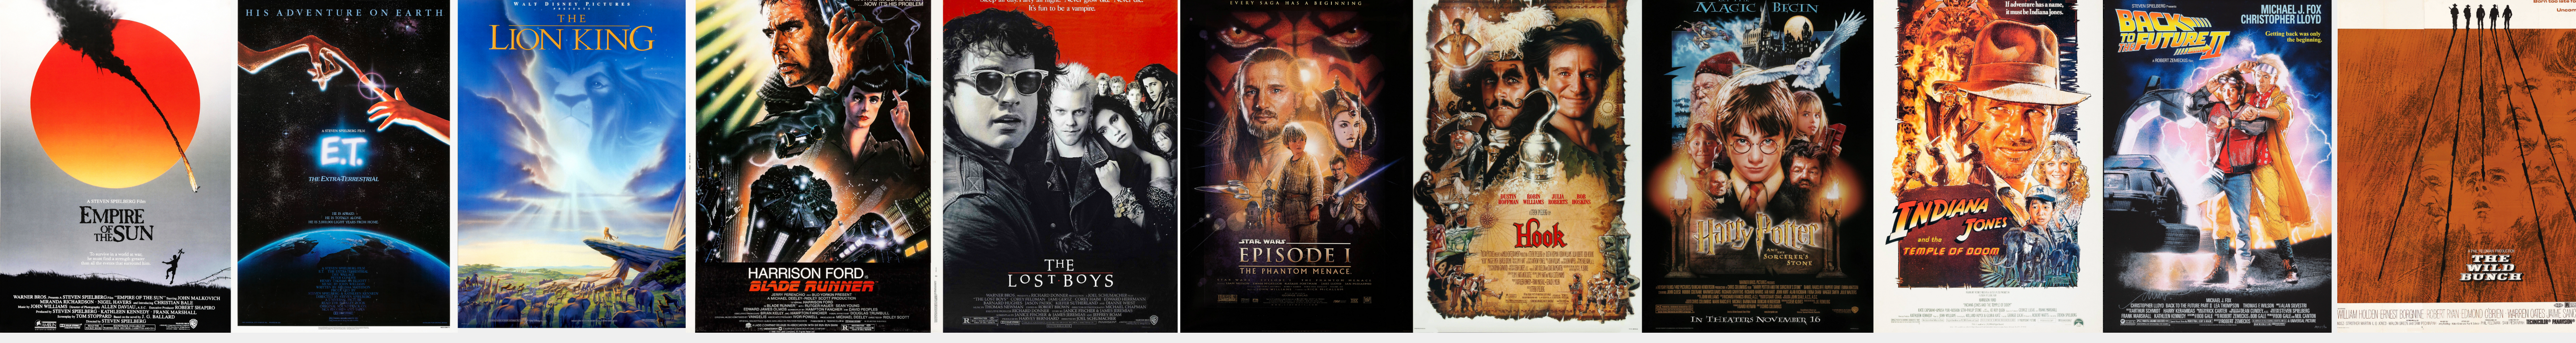 Top 10 Movie Poster Artists: Our picks for the most influential movie poster artists of all time.